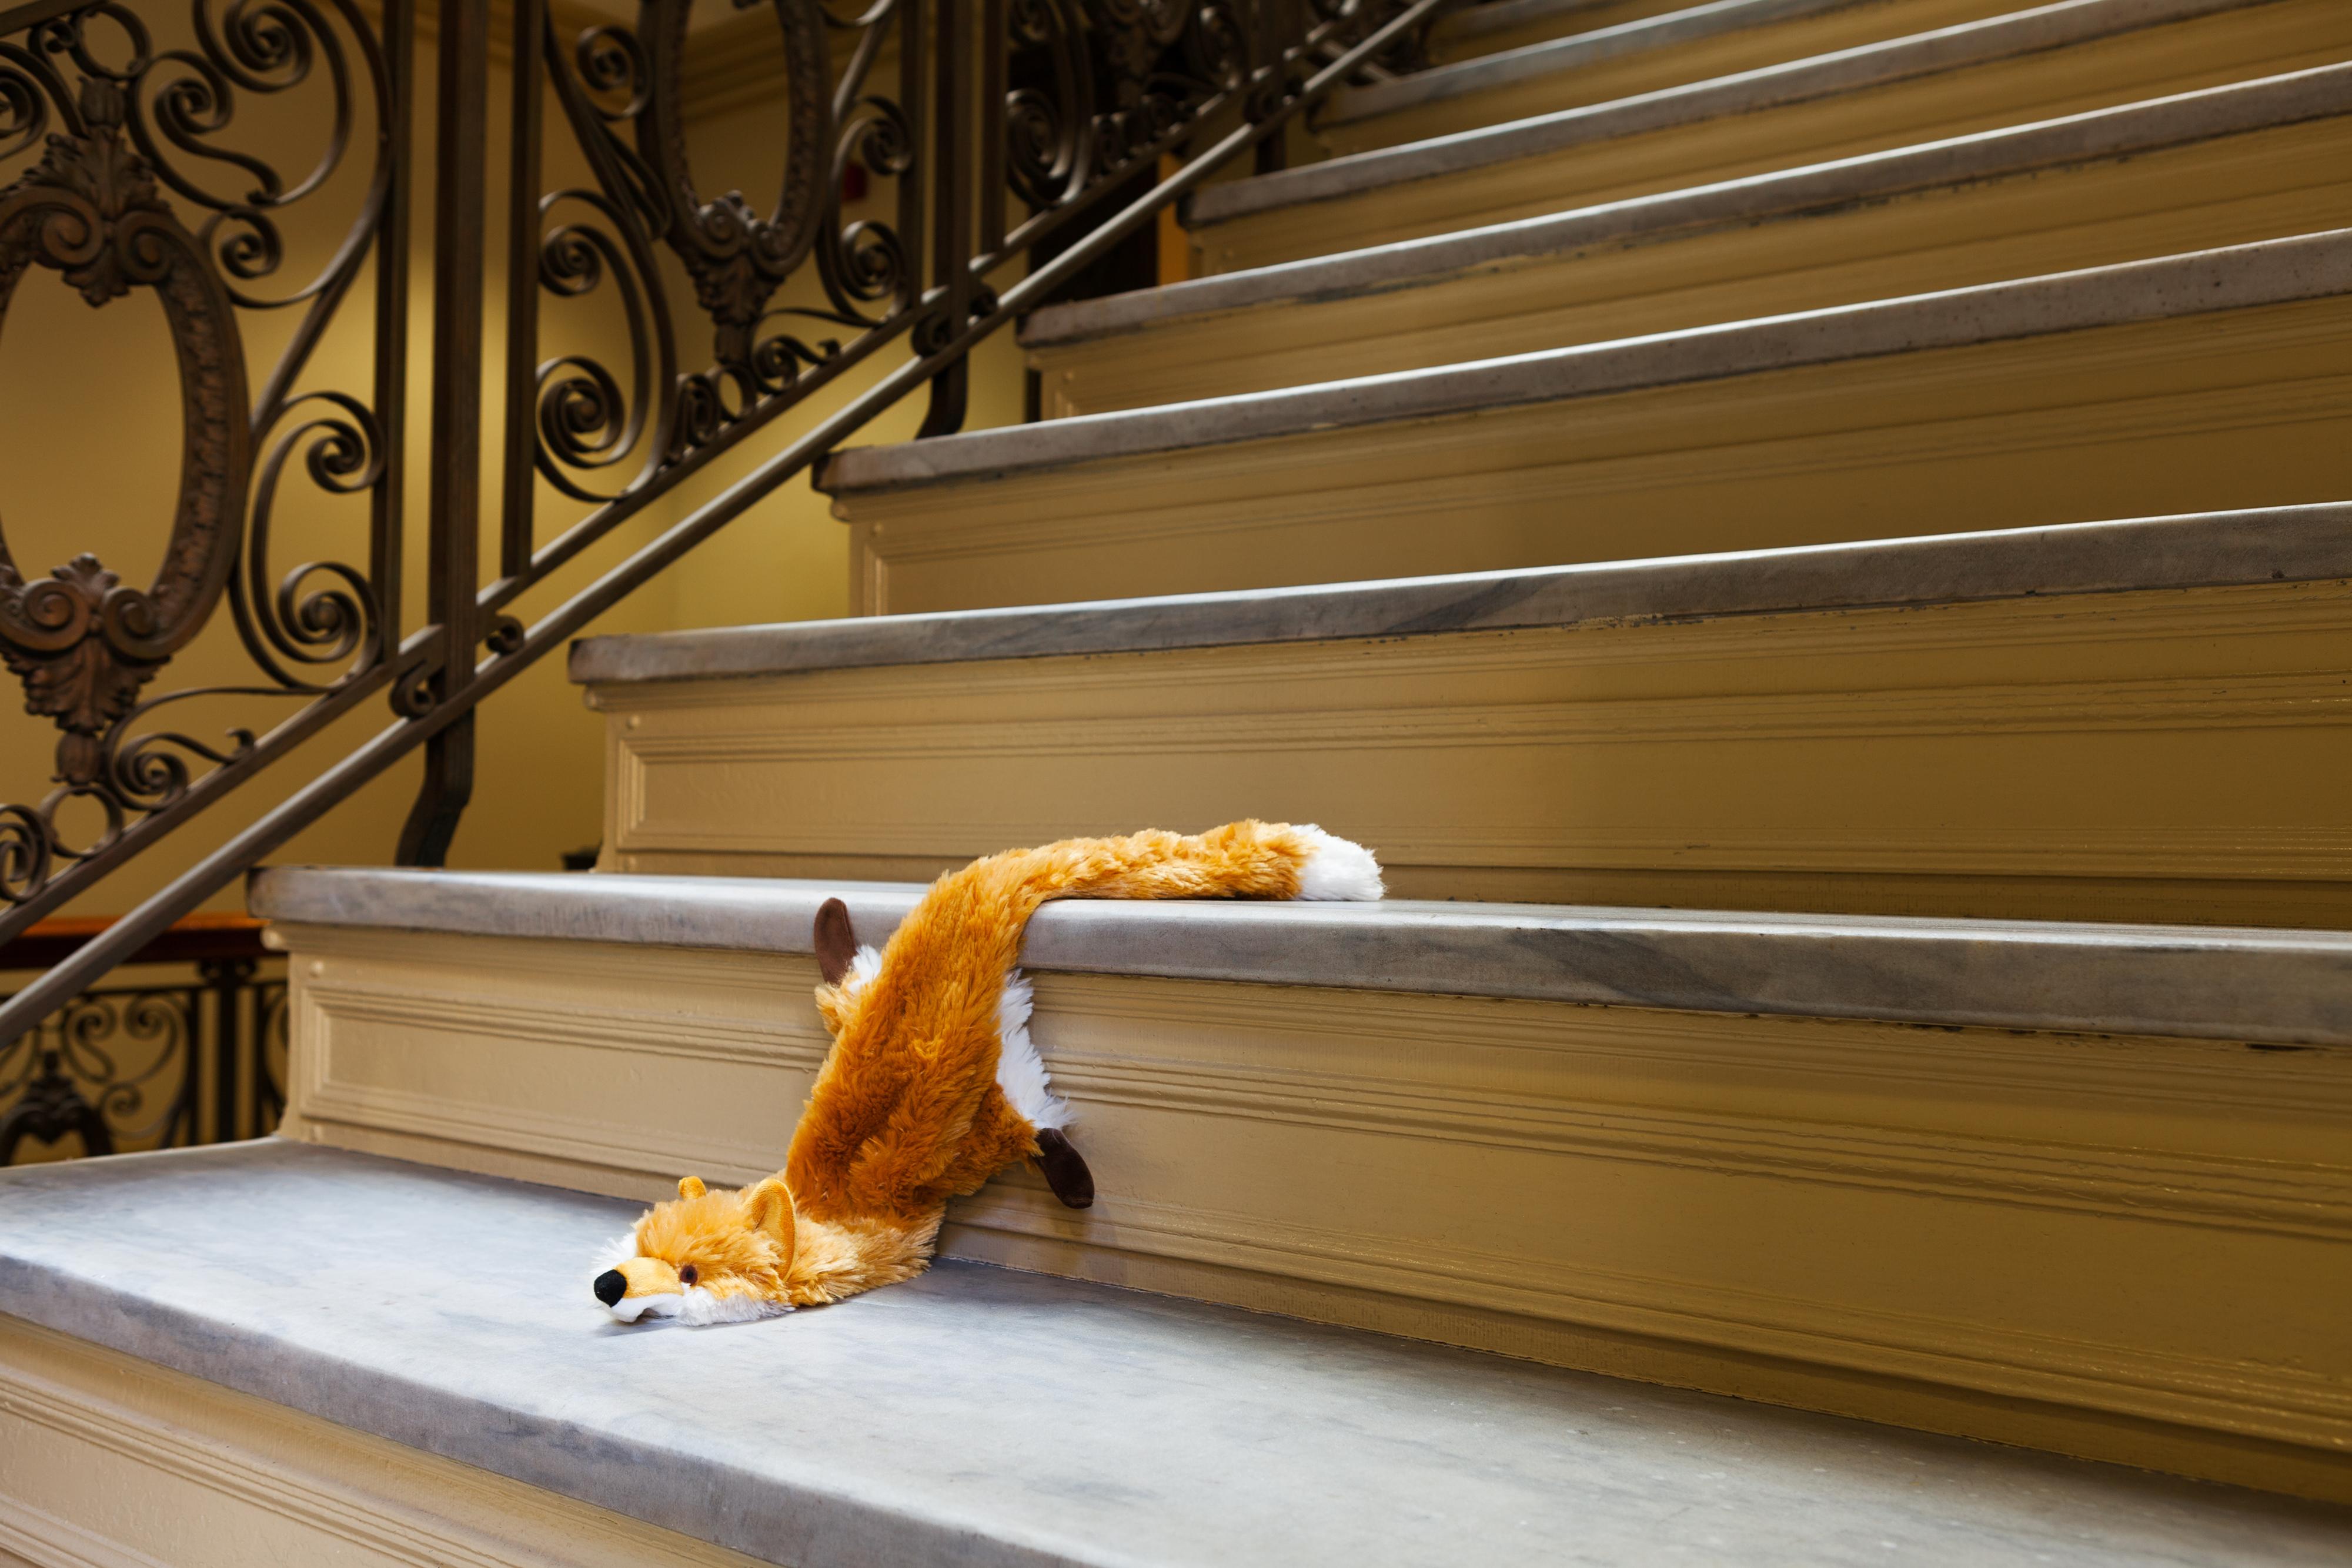 Jeanette May Animal Print - “Morbidity & Mortality: Fox” Humorous Photograph of a Dog Toy in a Crime Scene